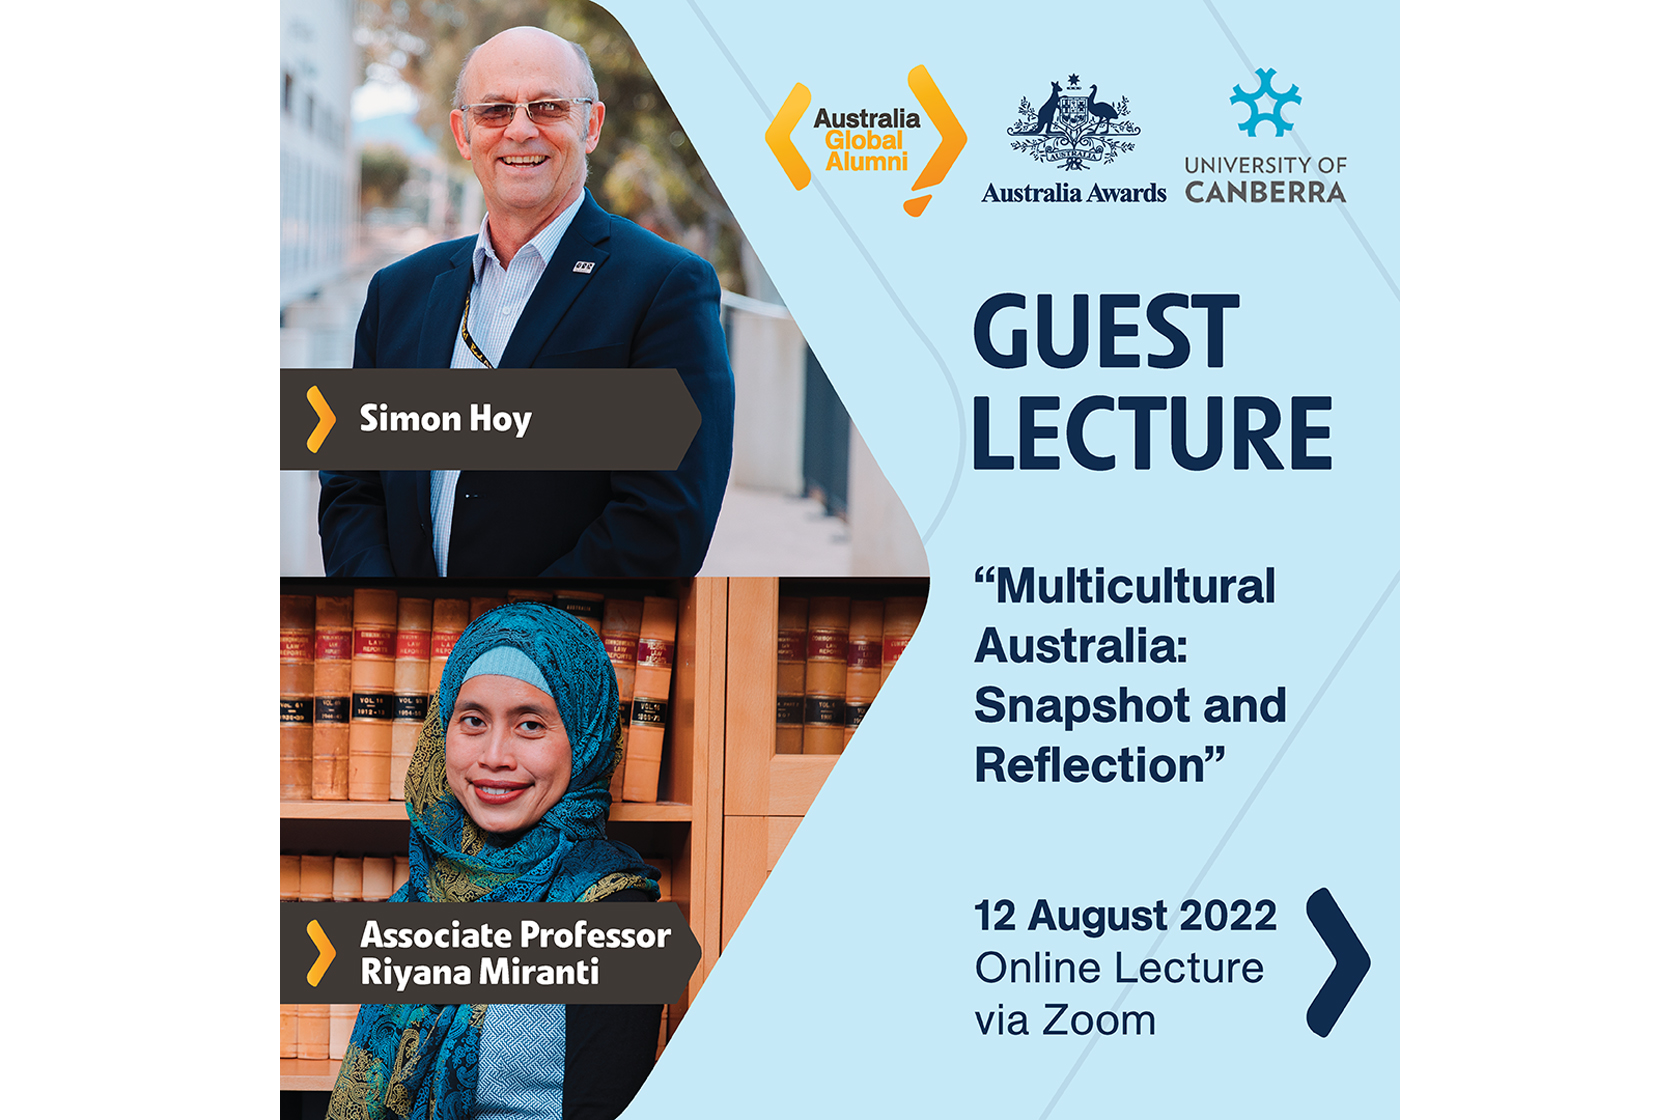 Join Our Lecture on “Multicultural Australia: Snapshot and Reflection”